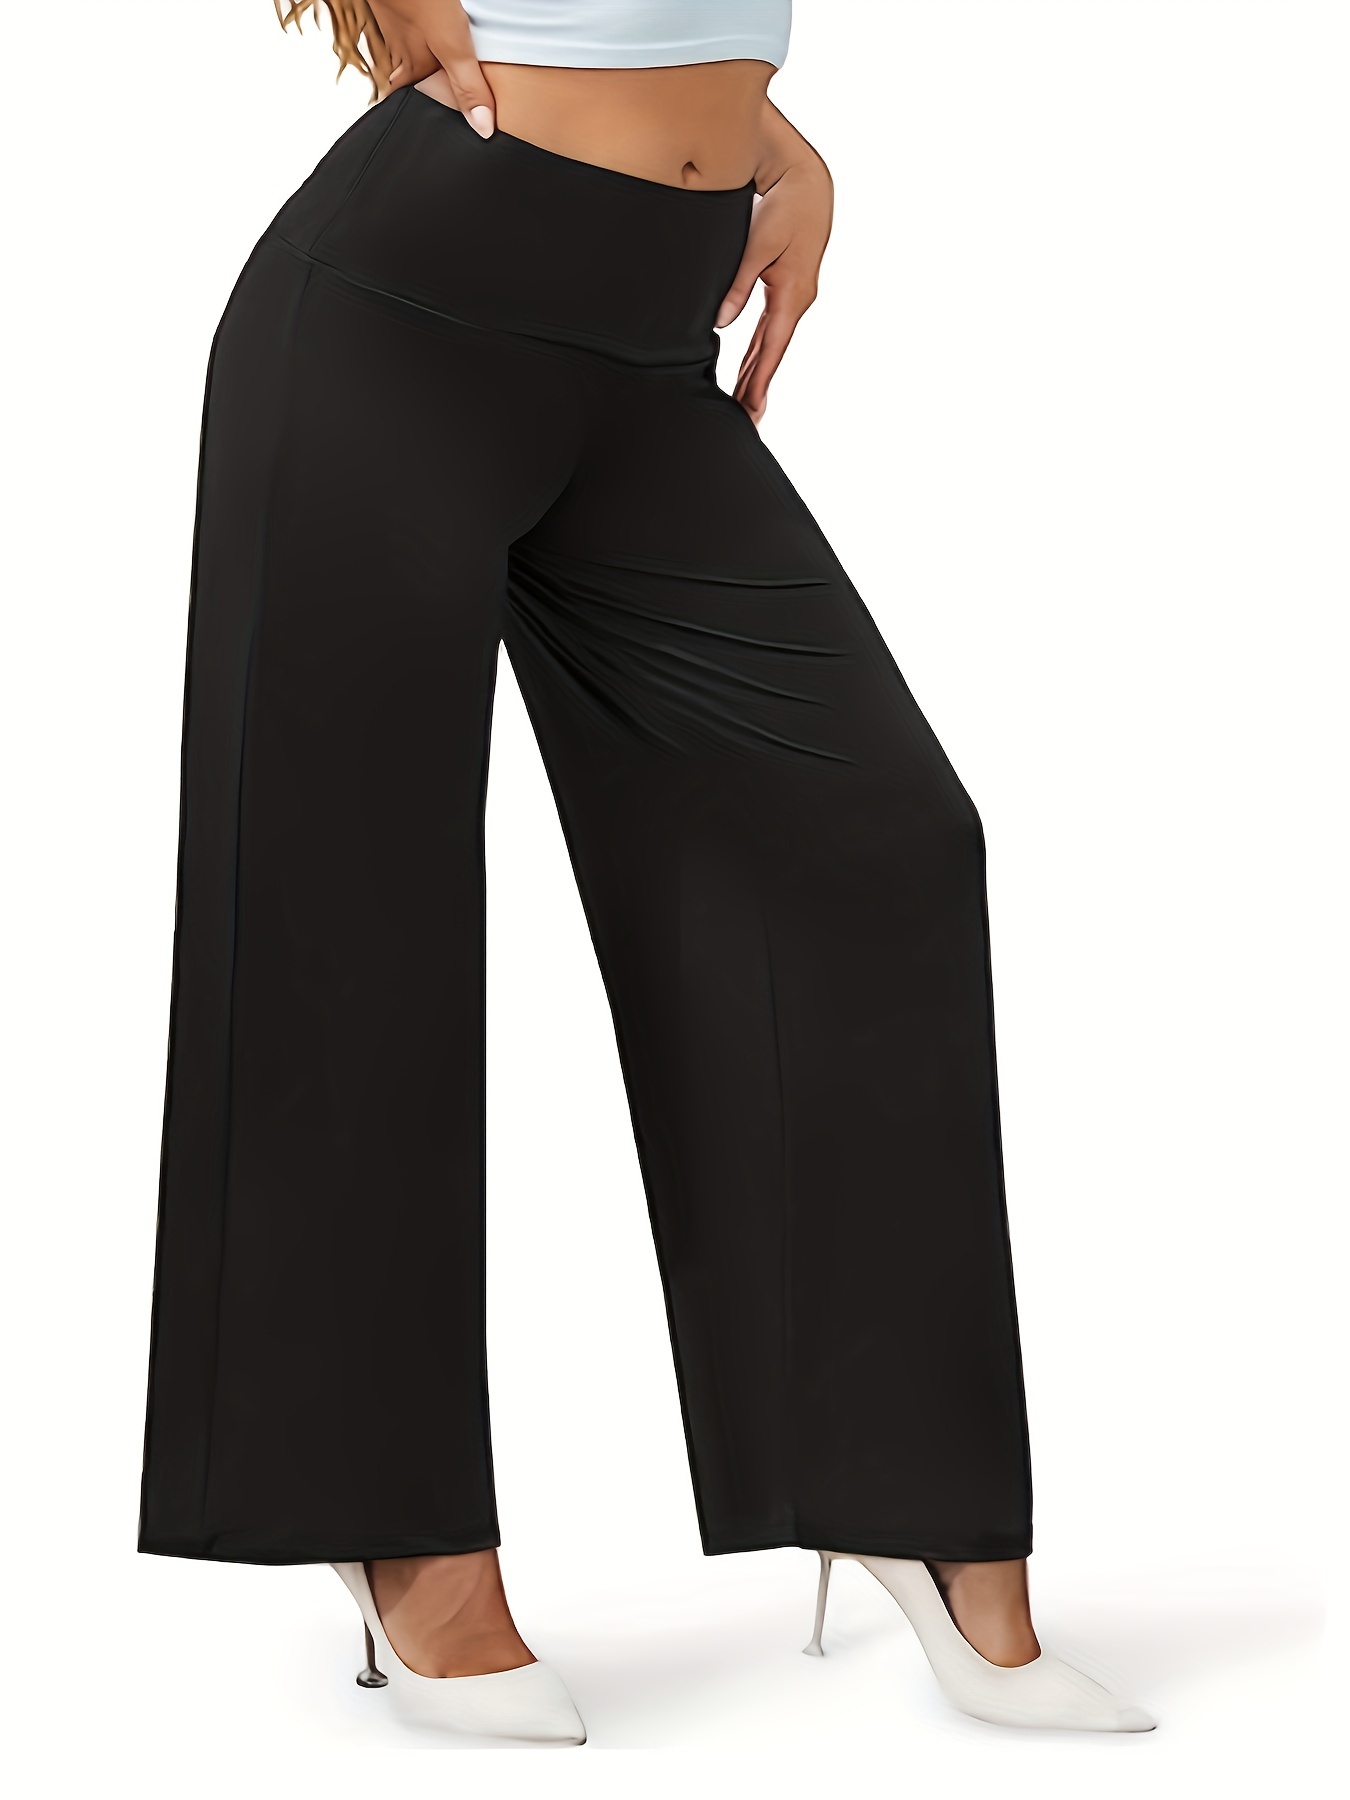 HSMQHJWE Tall Joggers For Women 20 Plus Size Dress Pants Womens Black Work  Pants Solid Stretch High Waist Zipper High Waist Straight Pants With Pocket  Trousers Plus Size Pants Cute 